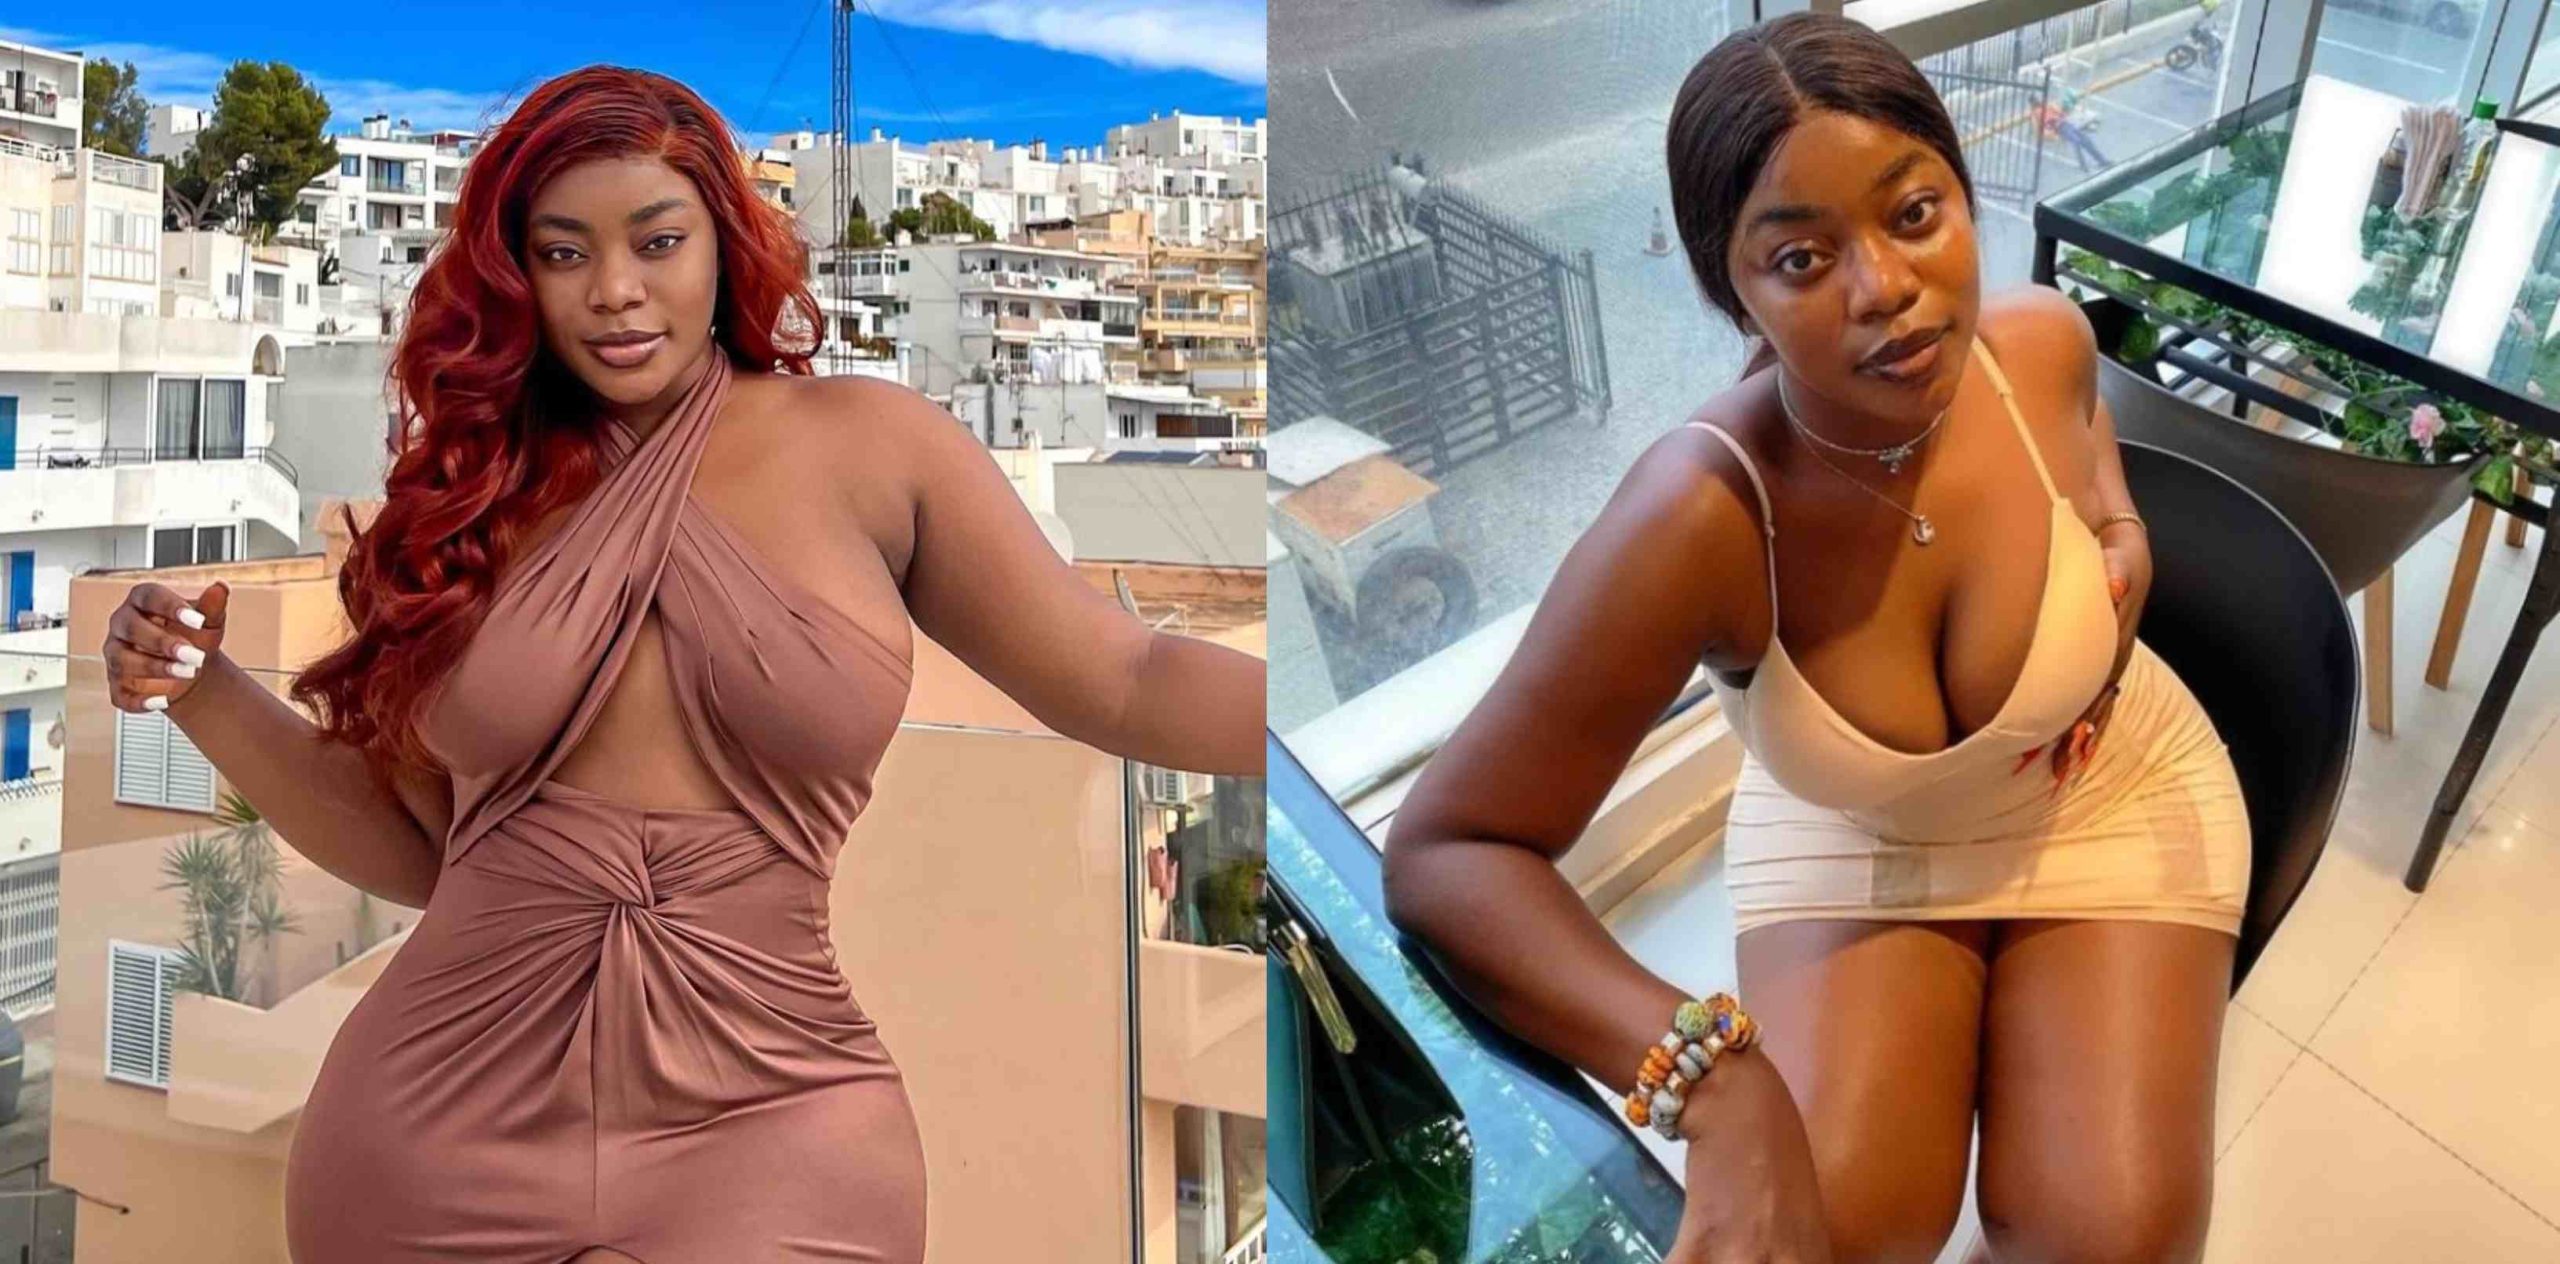 I stopped wearing exposing clothes after being mistaken for runs girl" –  Comedienne Ashmusy spills